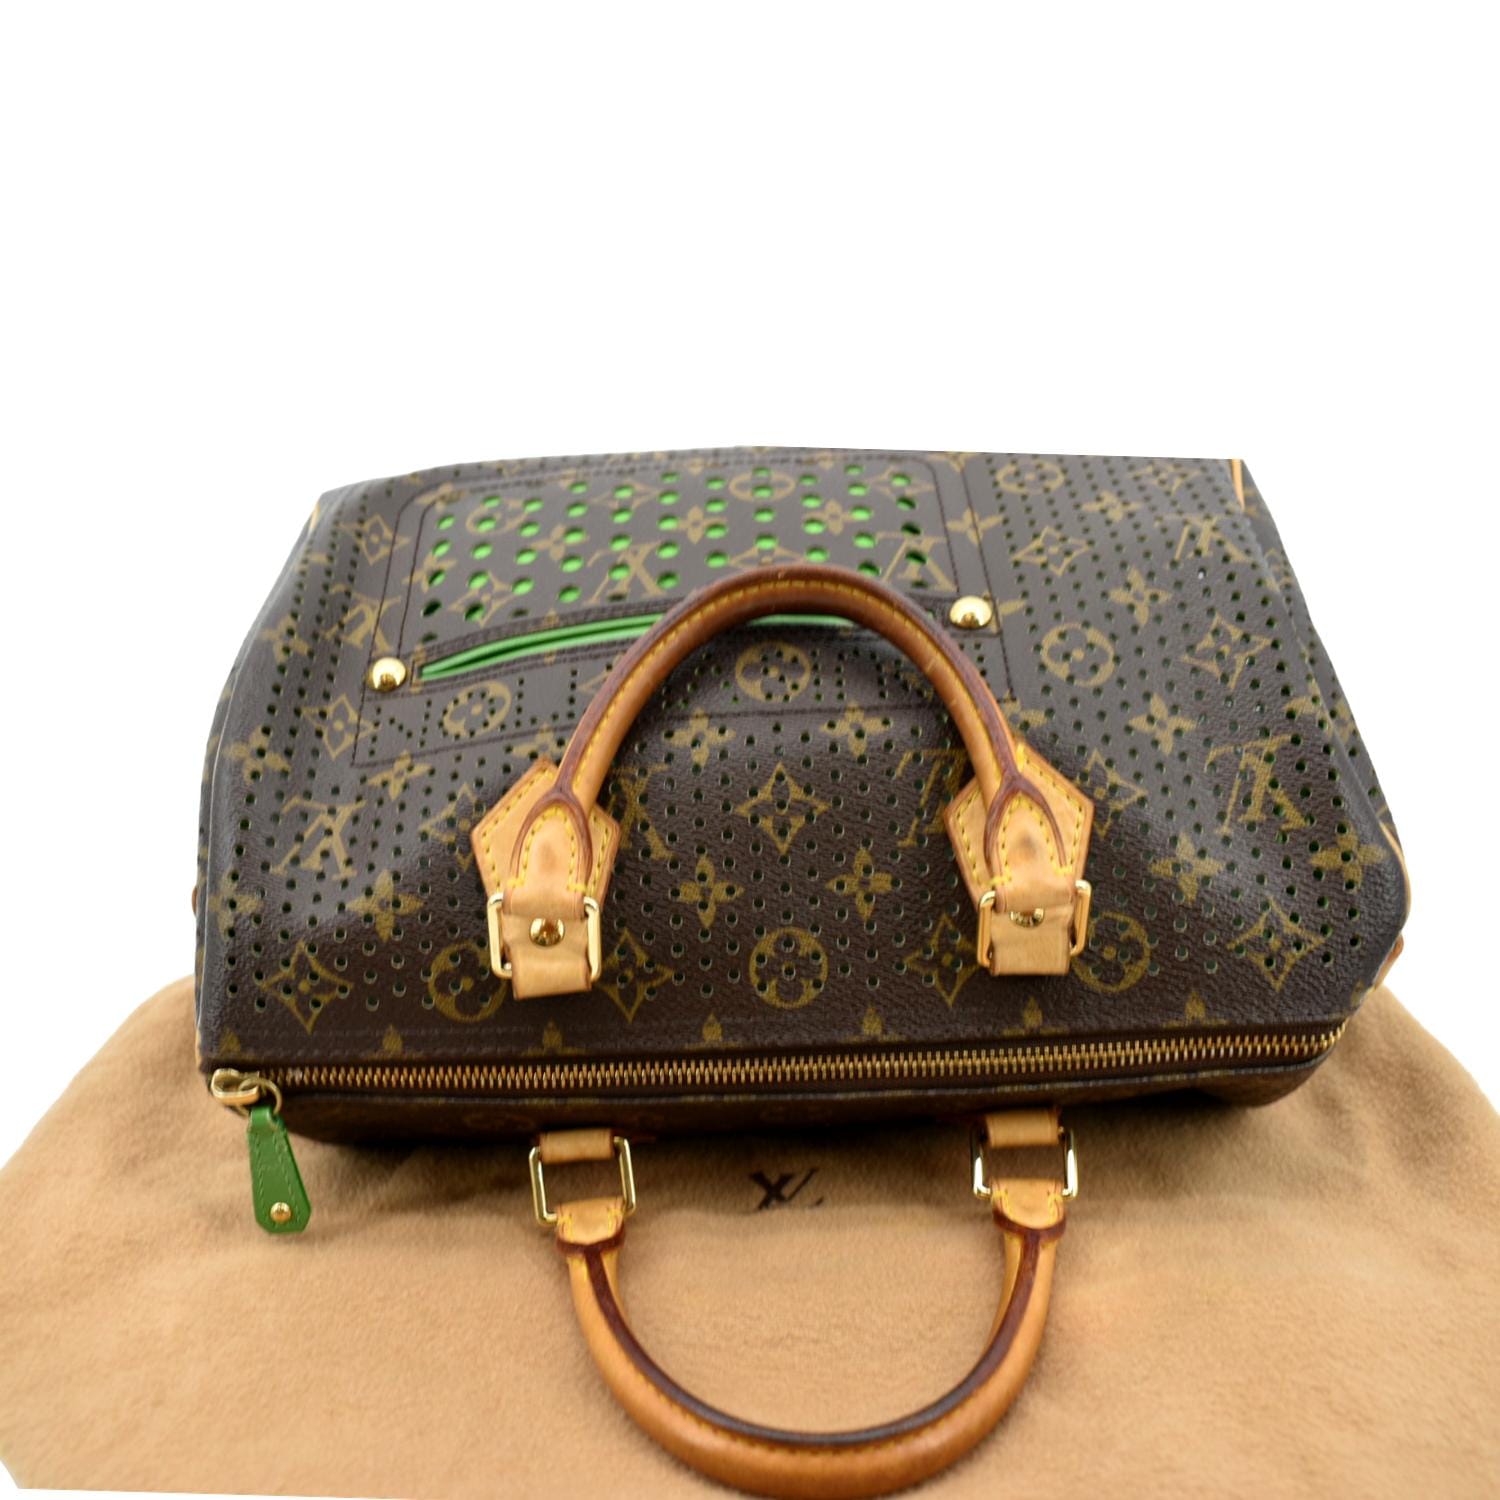 Louis Vuitton, Bags, Louis Vuittonspeedy 3perforated Brown  Monogramlimited Edition Very Rare